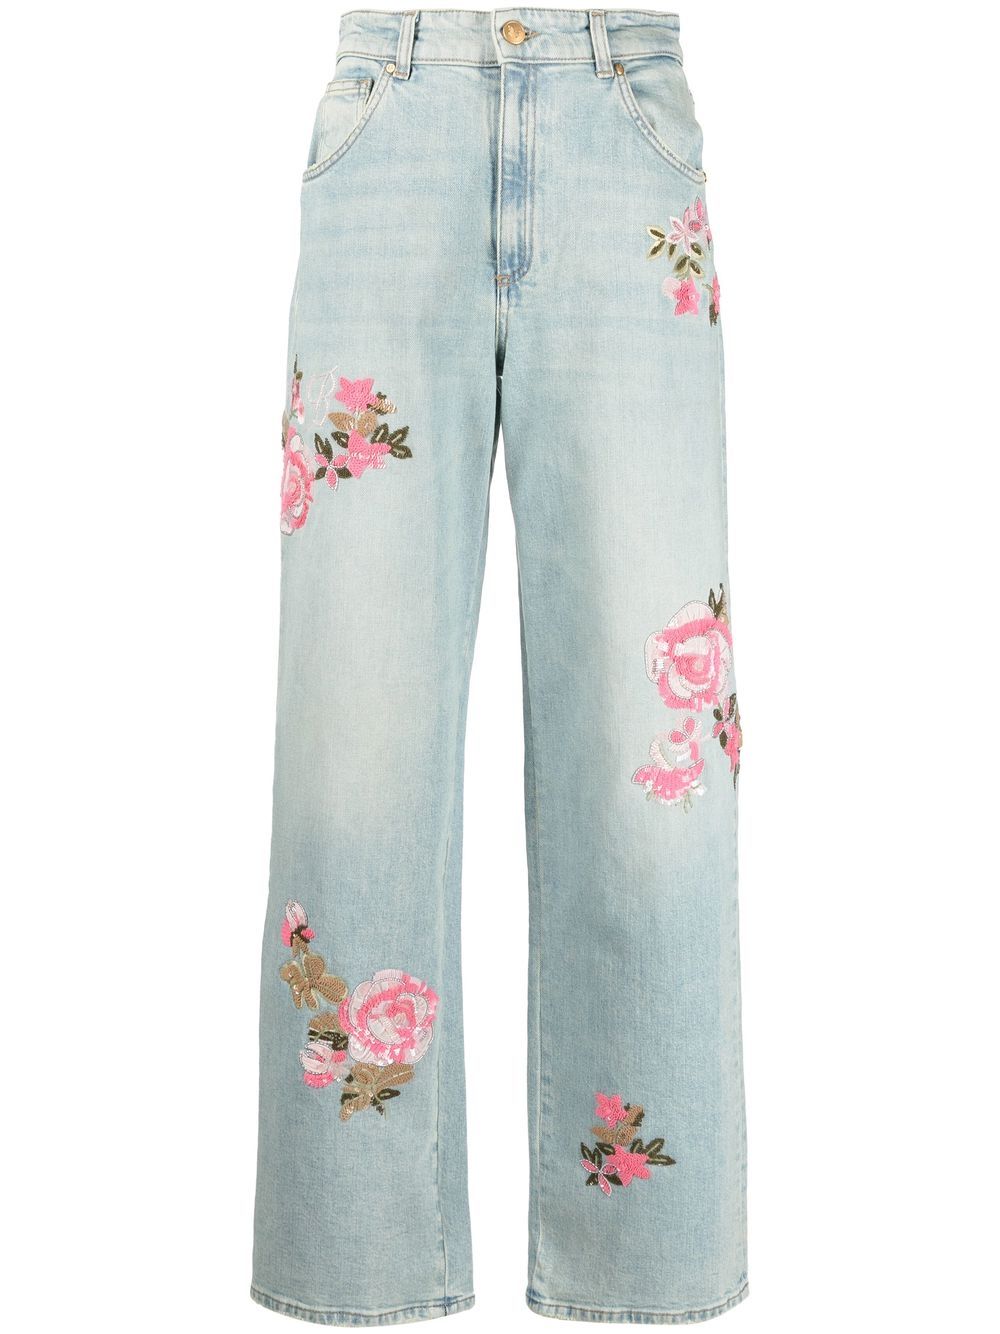 BLUMARINE HIGH-RISE FLORAL-EMBROIDERED JEANS